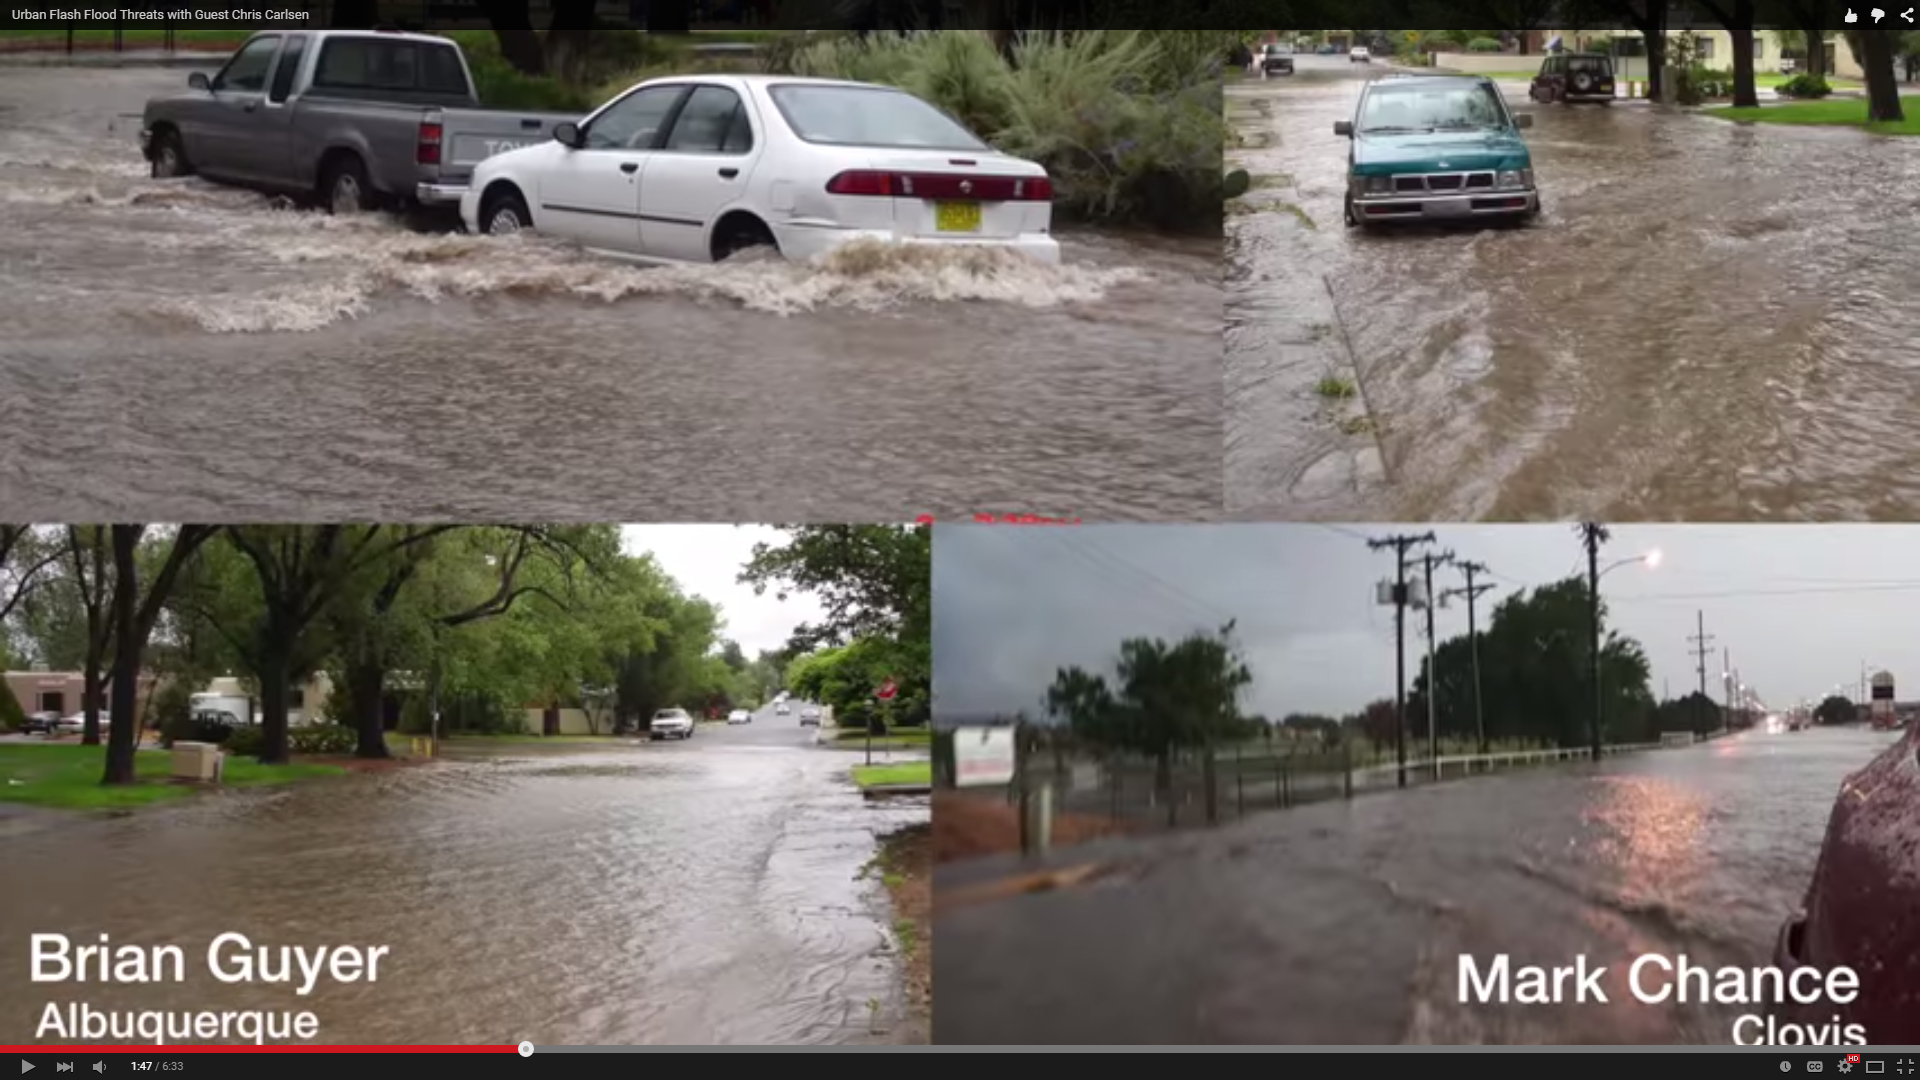 Pictures of urban flooding showing streets underwater and cars at various levels of flooding.